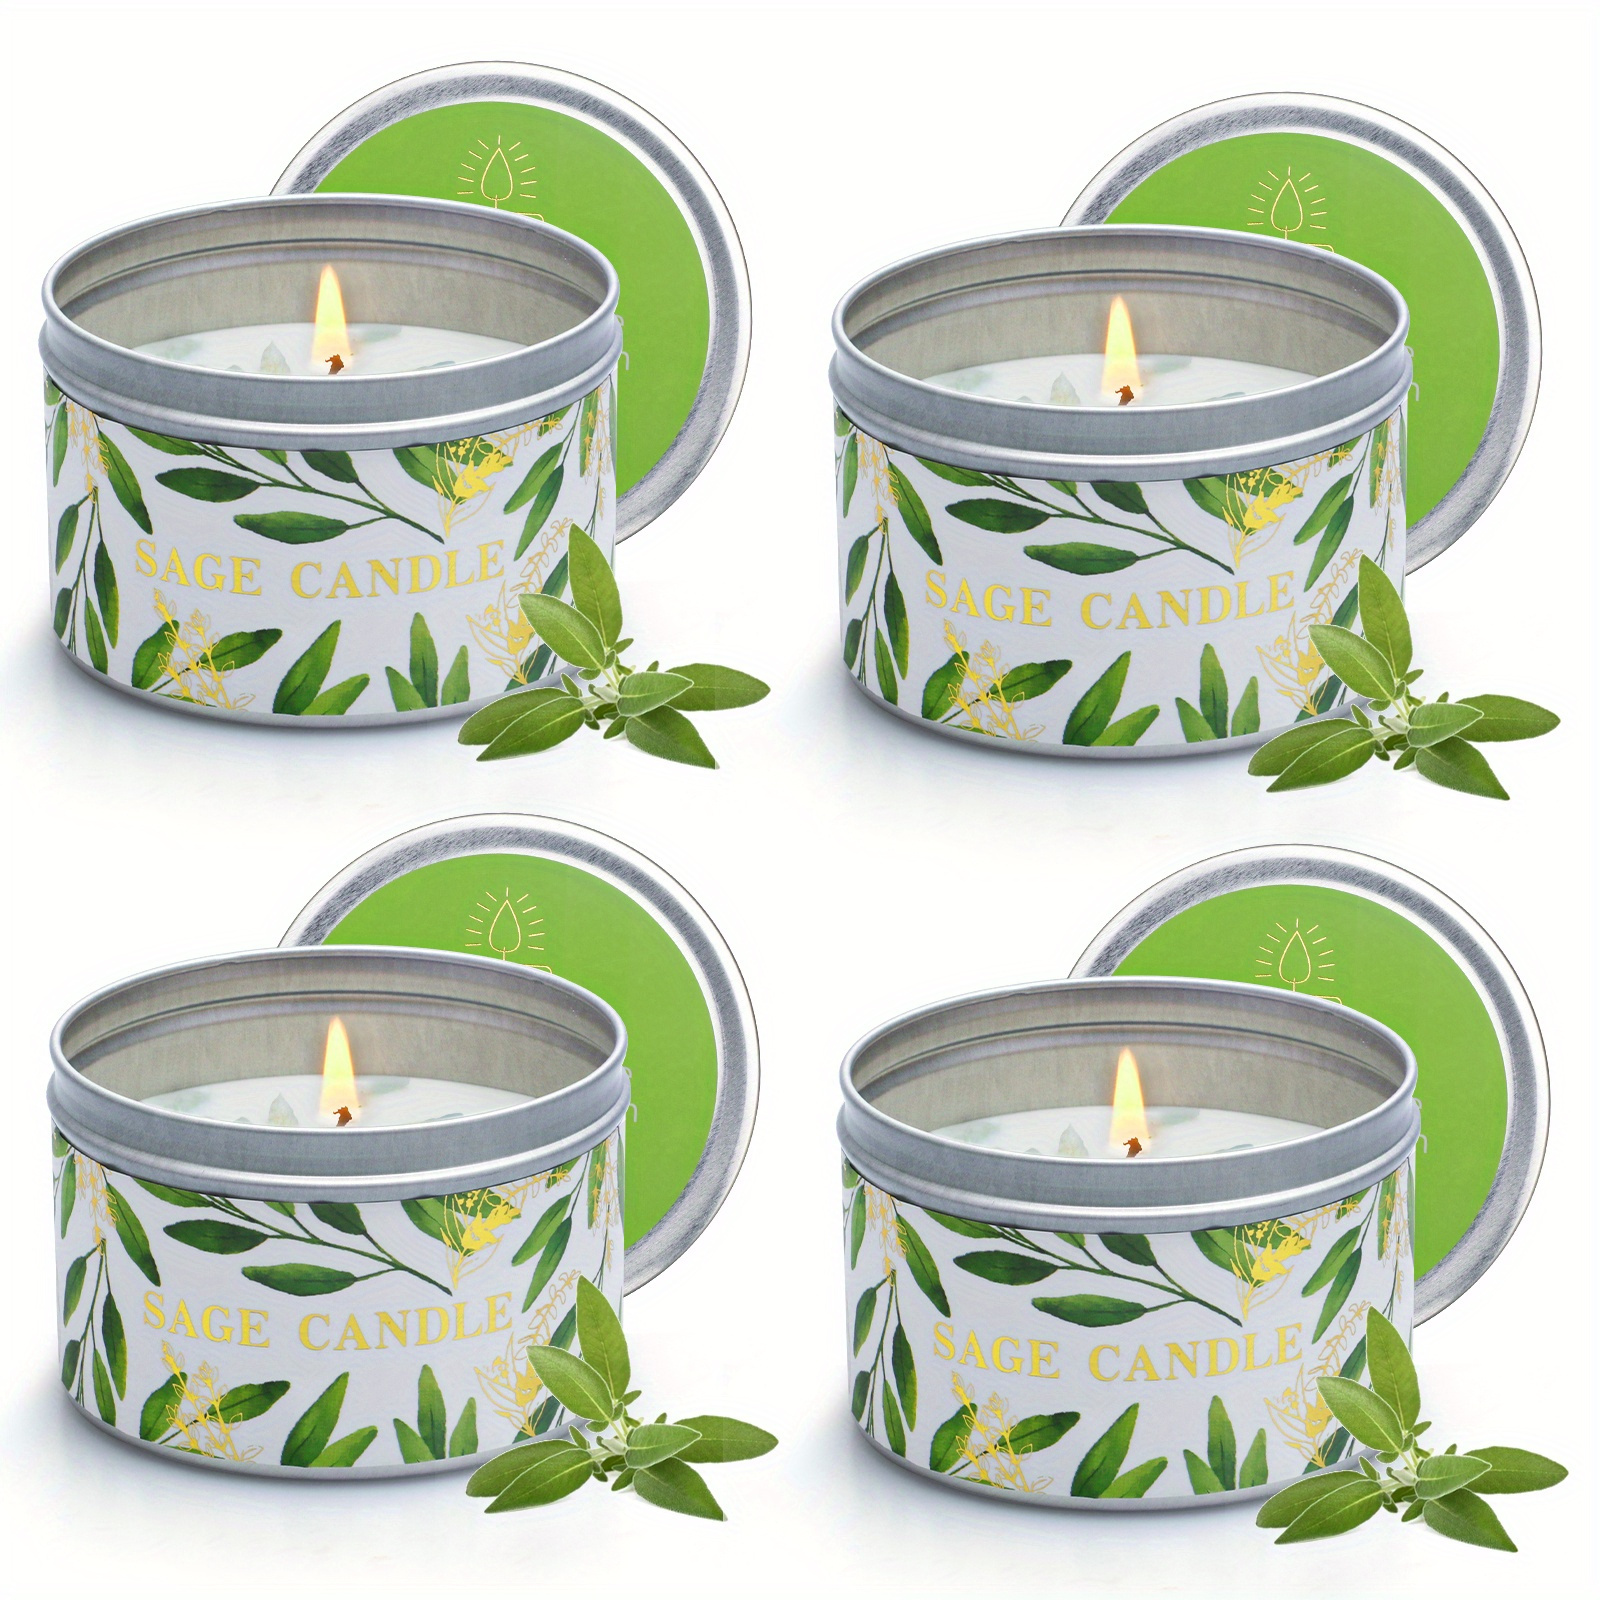 

Cjvius 4 Pcs House Warming Gifts Pure White Sage Candle Set -18oz 120 Hour Long Lasting Natural Soy Wax Candle